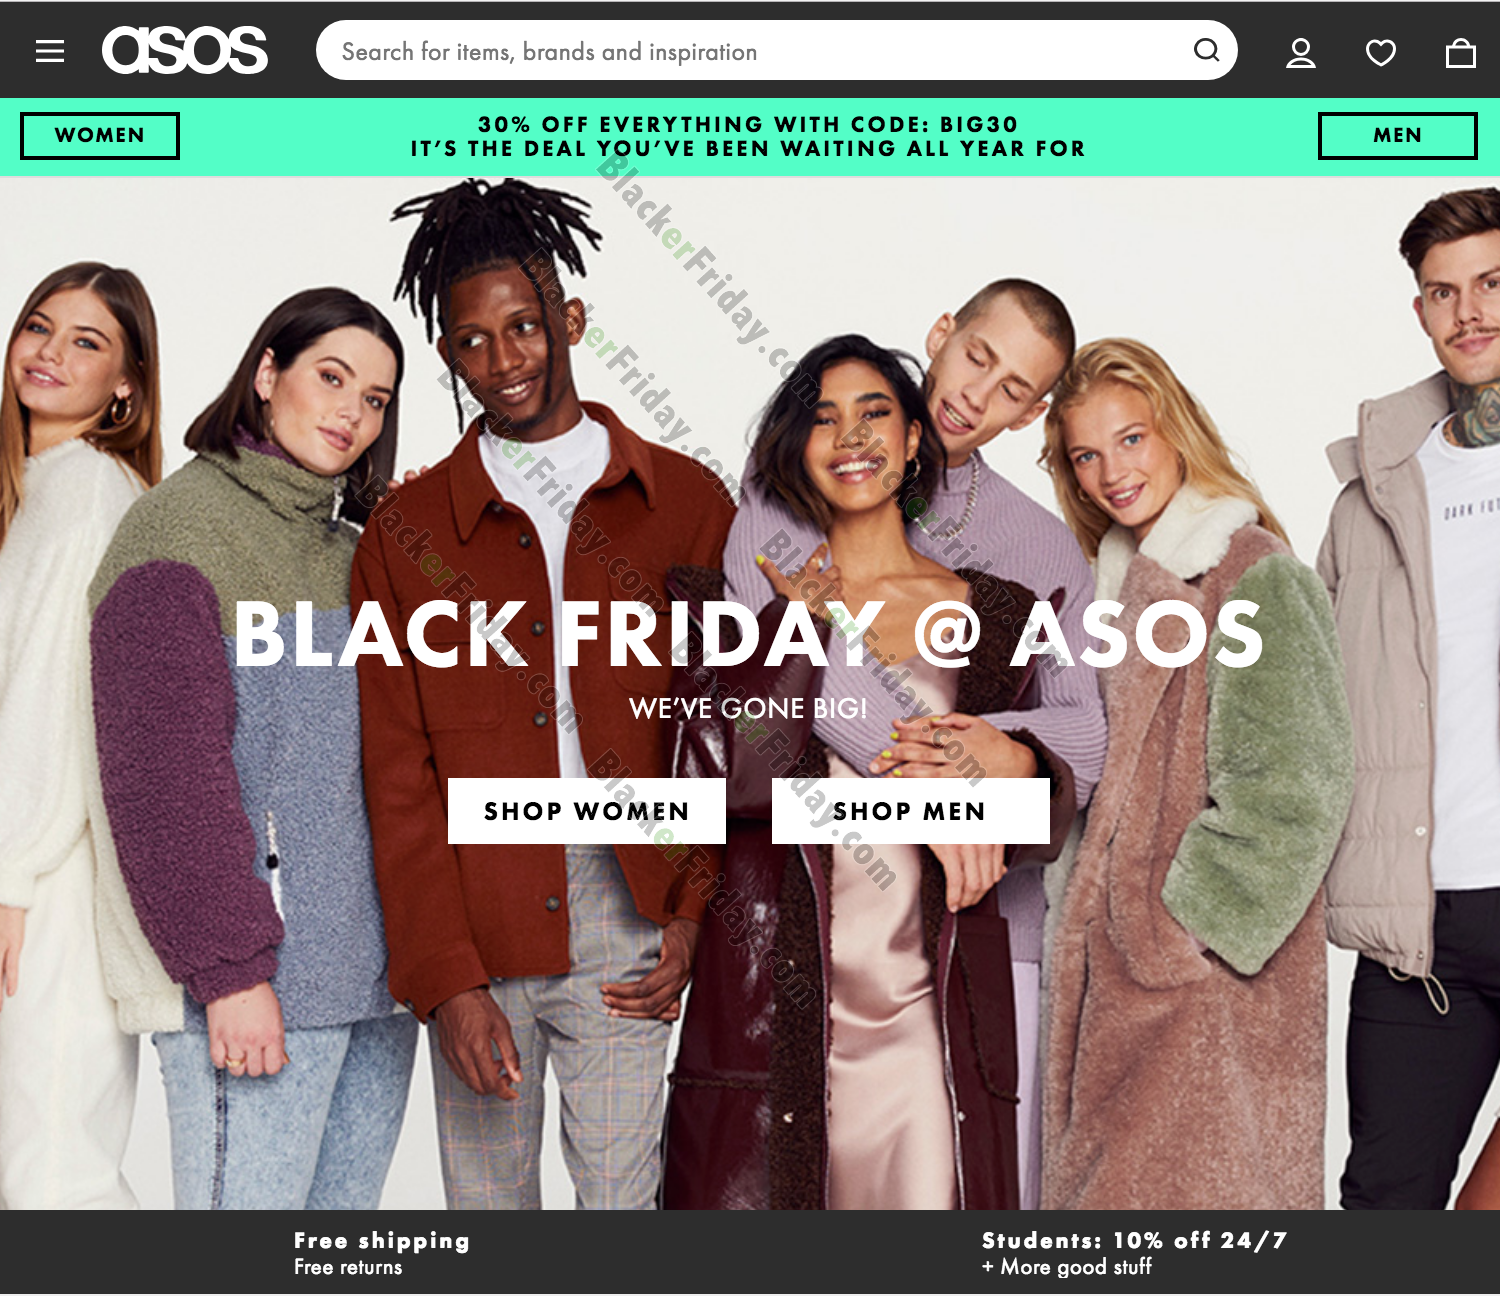 ASOS Cyber Monday 2021 Sale - What to Expect - Blacker Friday